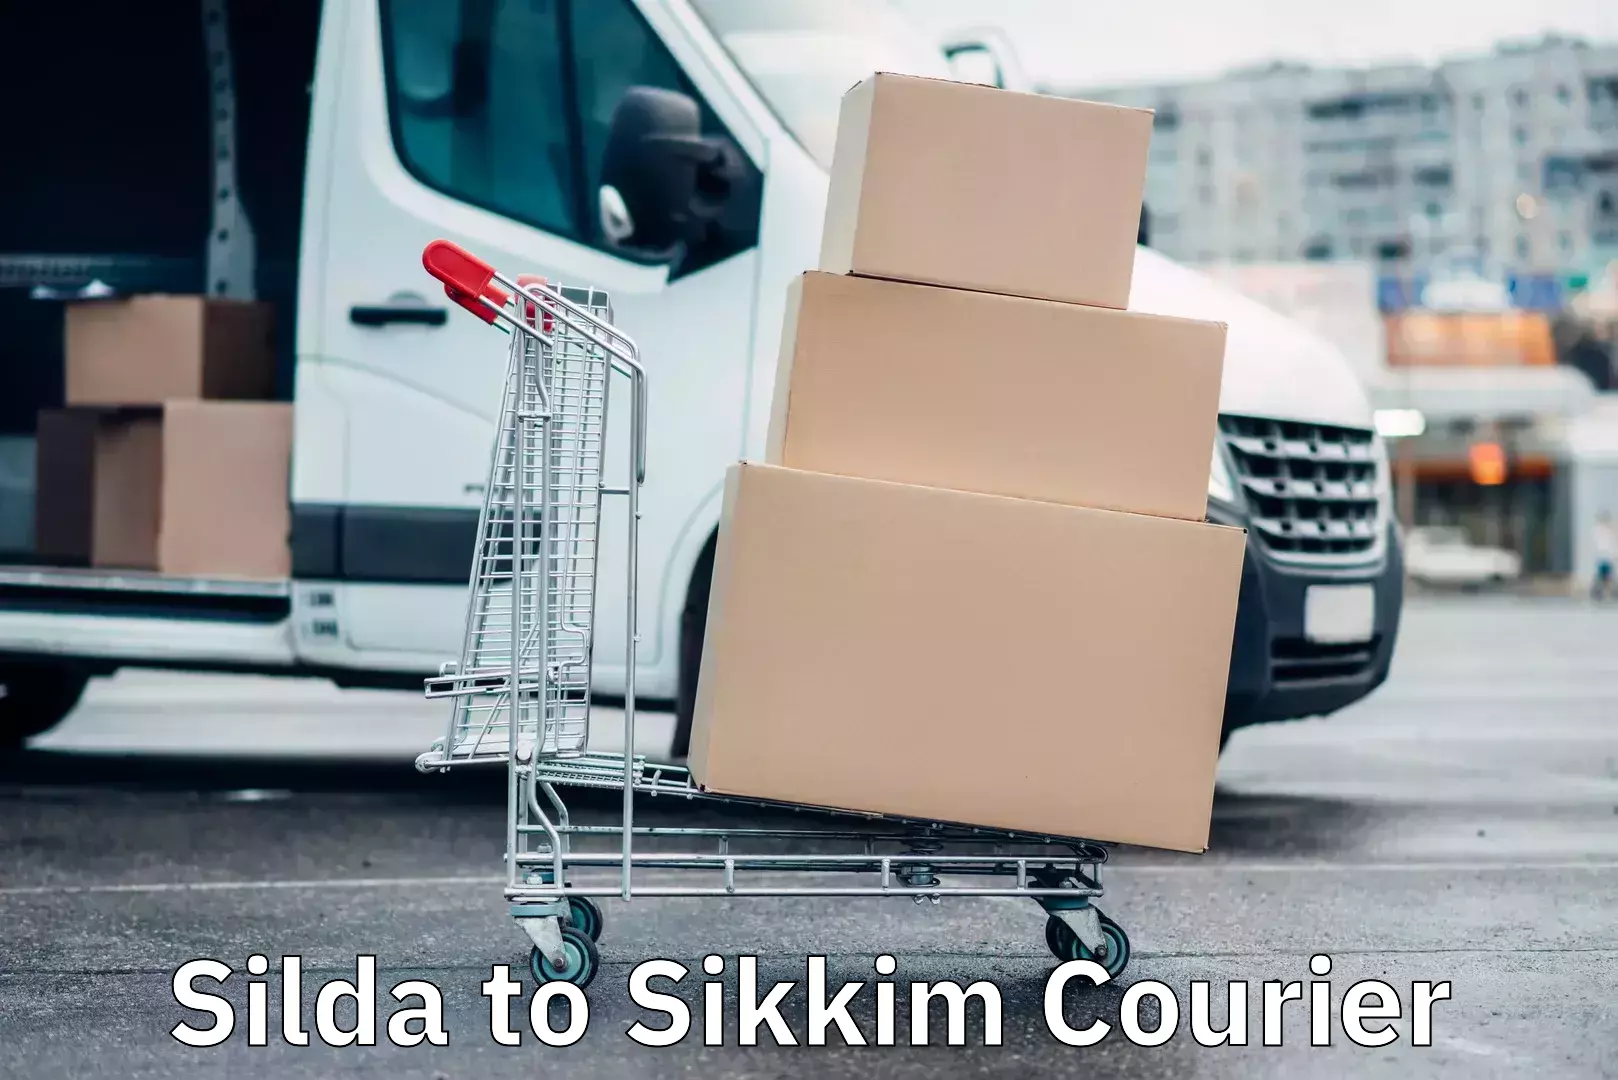 Reliable package handling Silda to Sikkim